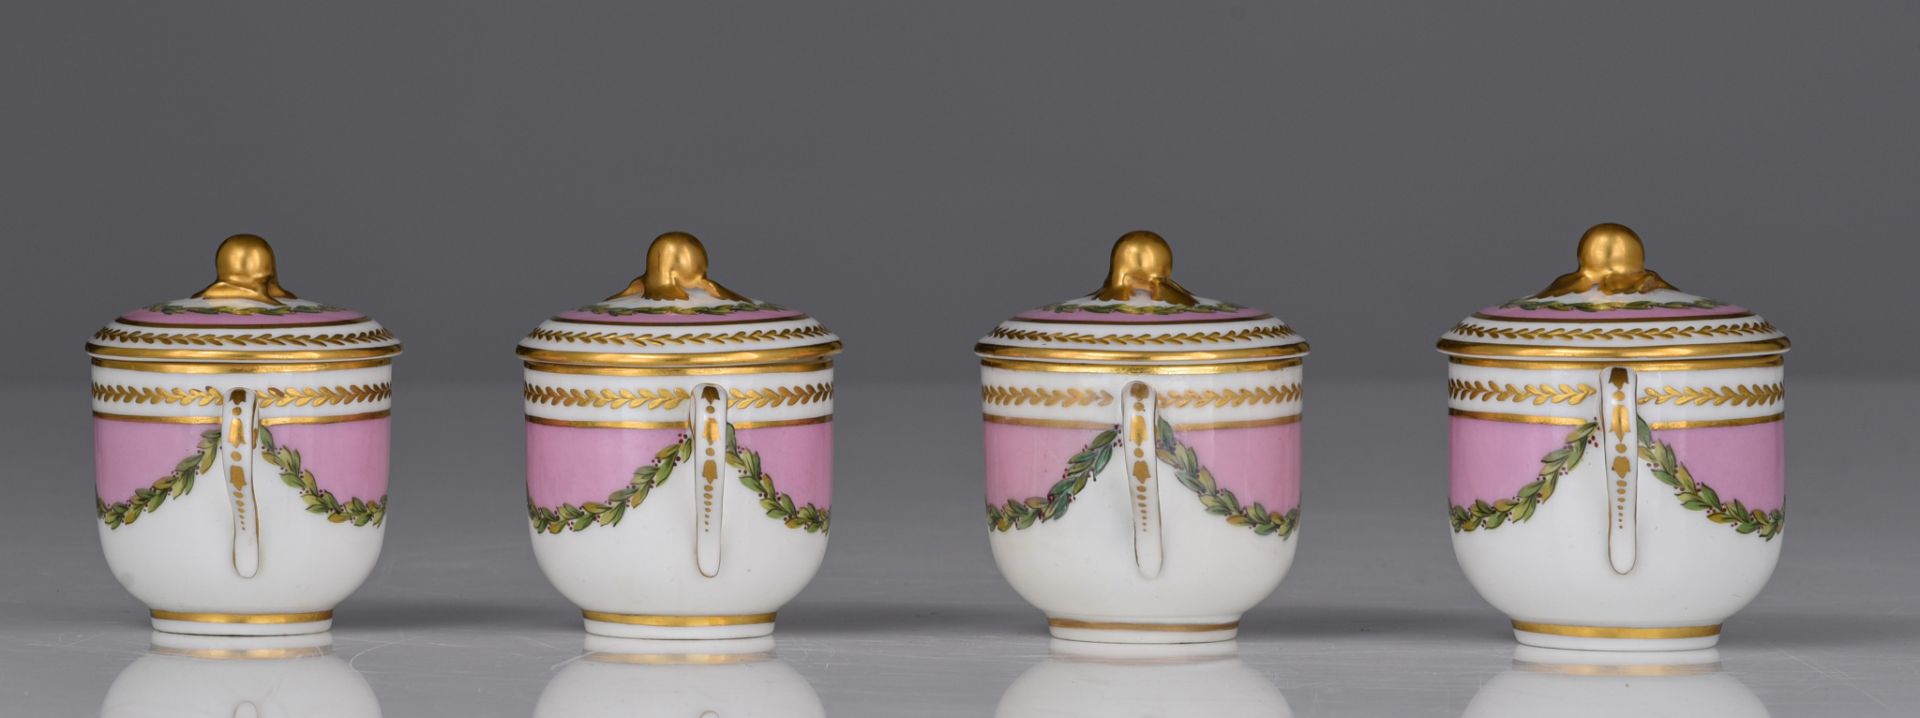 (BIDDING ONLY ON CARLOBONTE.BE) A 12 person Sevres porcelain set of dessert cups on a matching tray, - Image 7 of 18